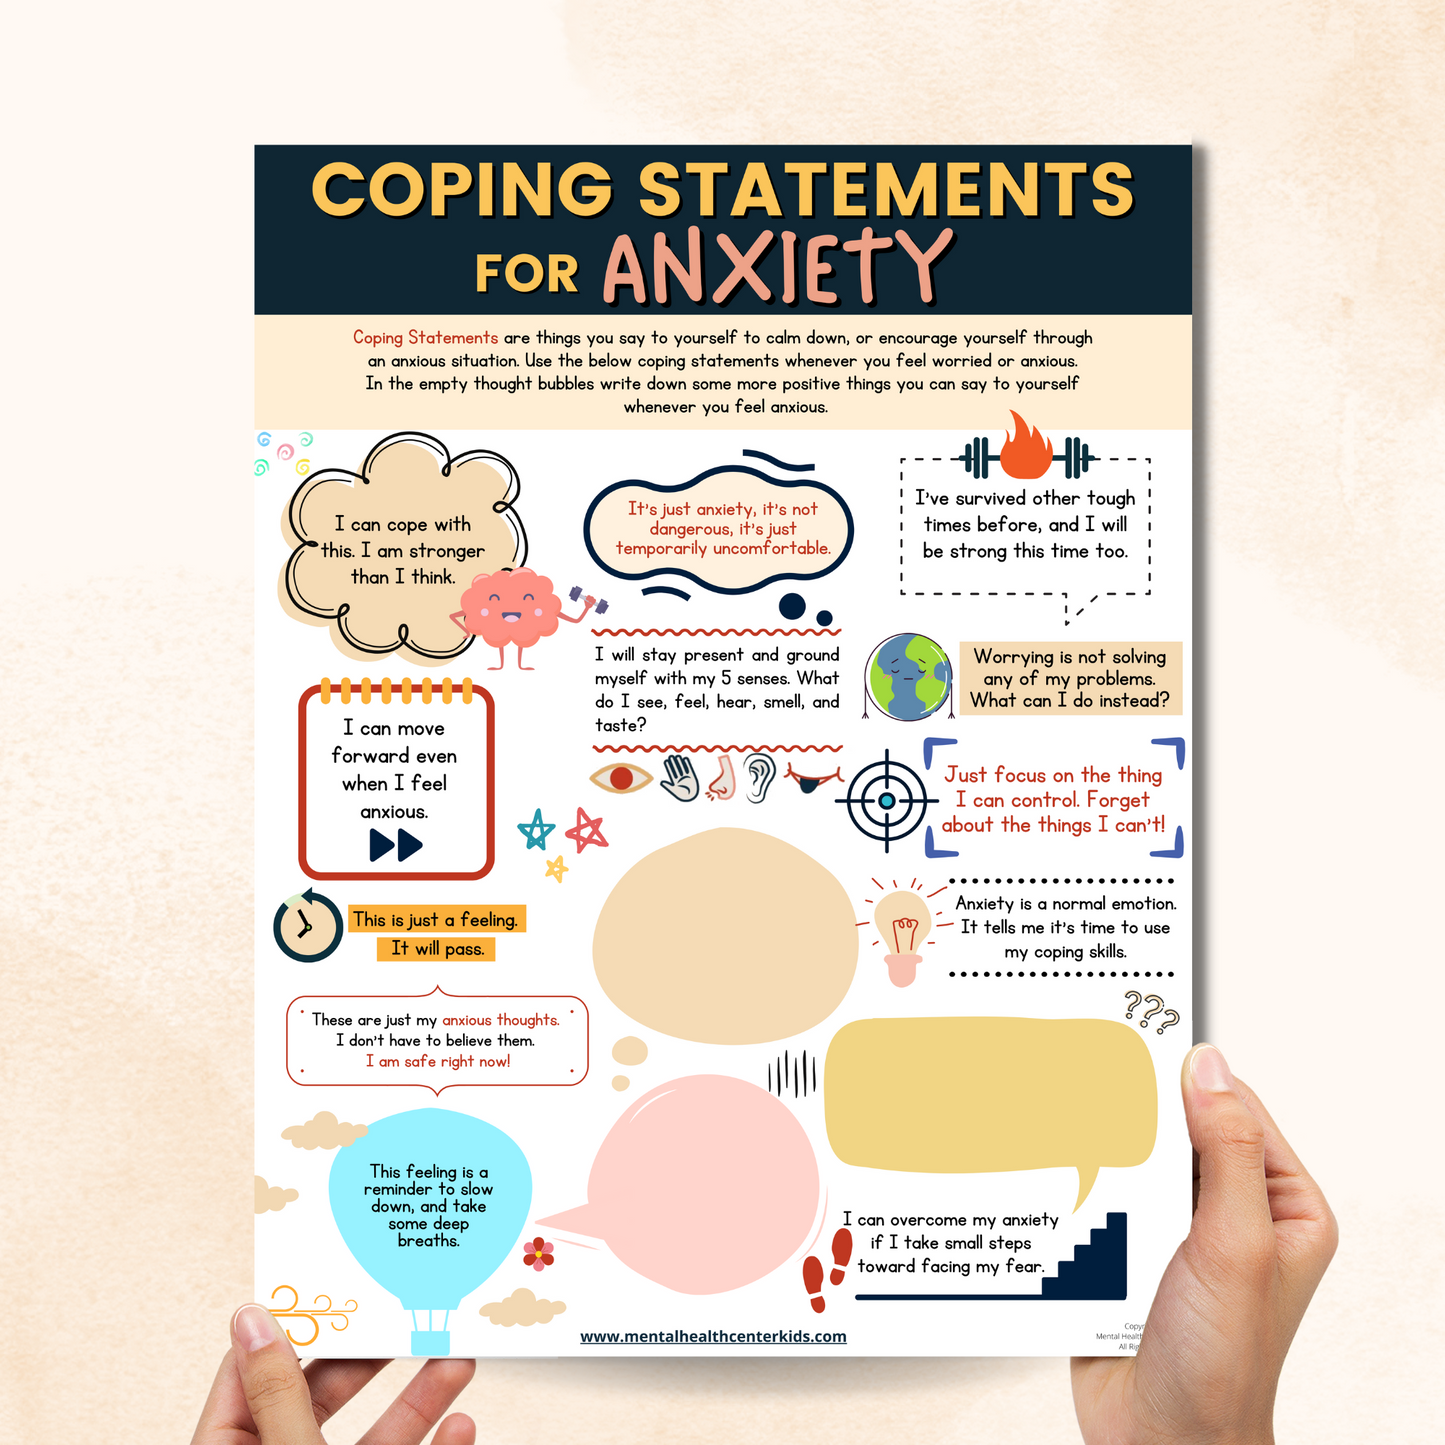 Coping Statements for Anxiety